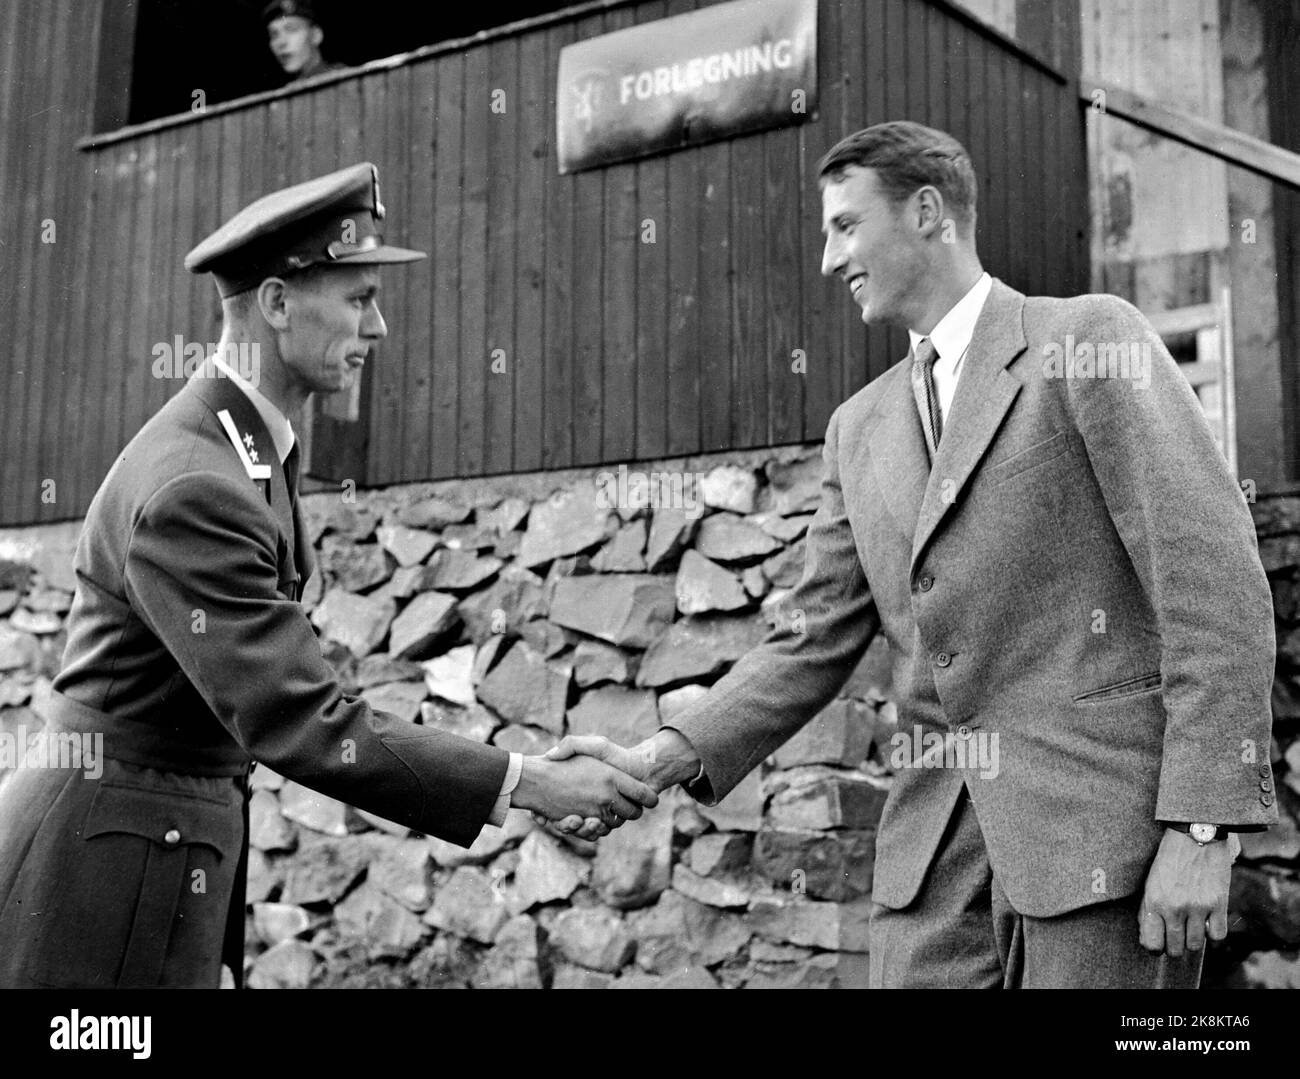 Nordseter, Lillehammer 19570820 Prince Harald begins as an aspirant at the War School, with attendance at Nordseter at Lillehammer. He is welcomed by the Chief of the War School, Colonel Lieutenant Arne Brandsæter. Photo: NTB / NTB Stock Photo